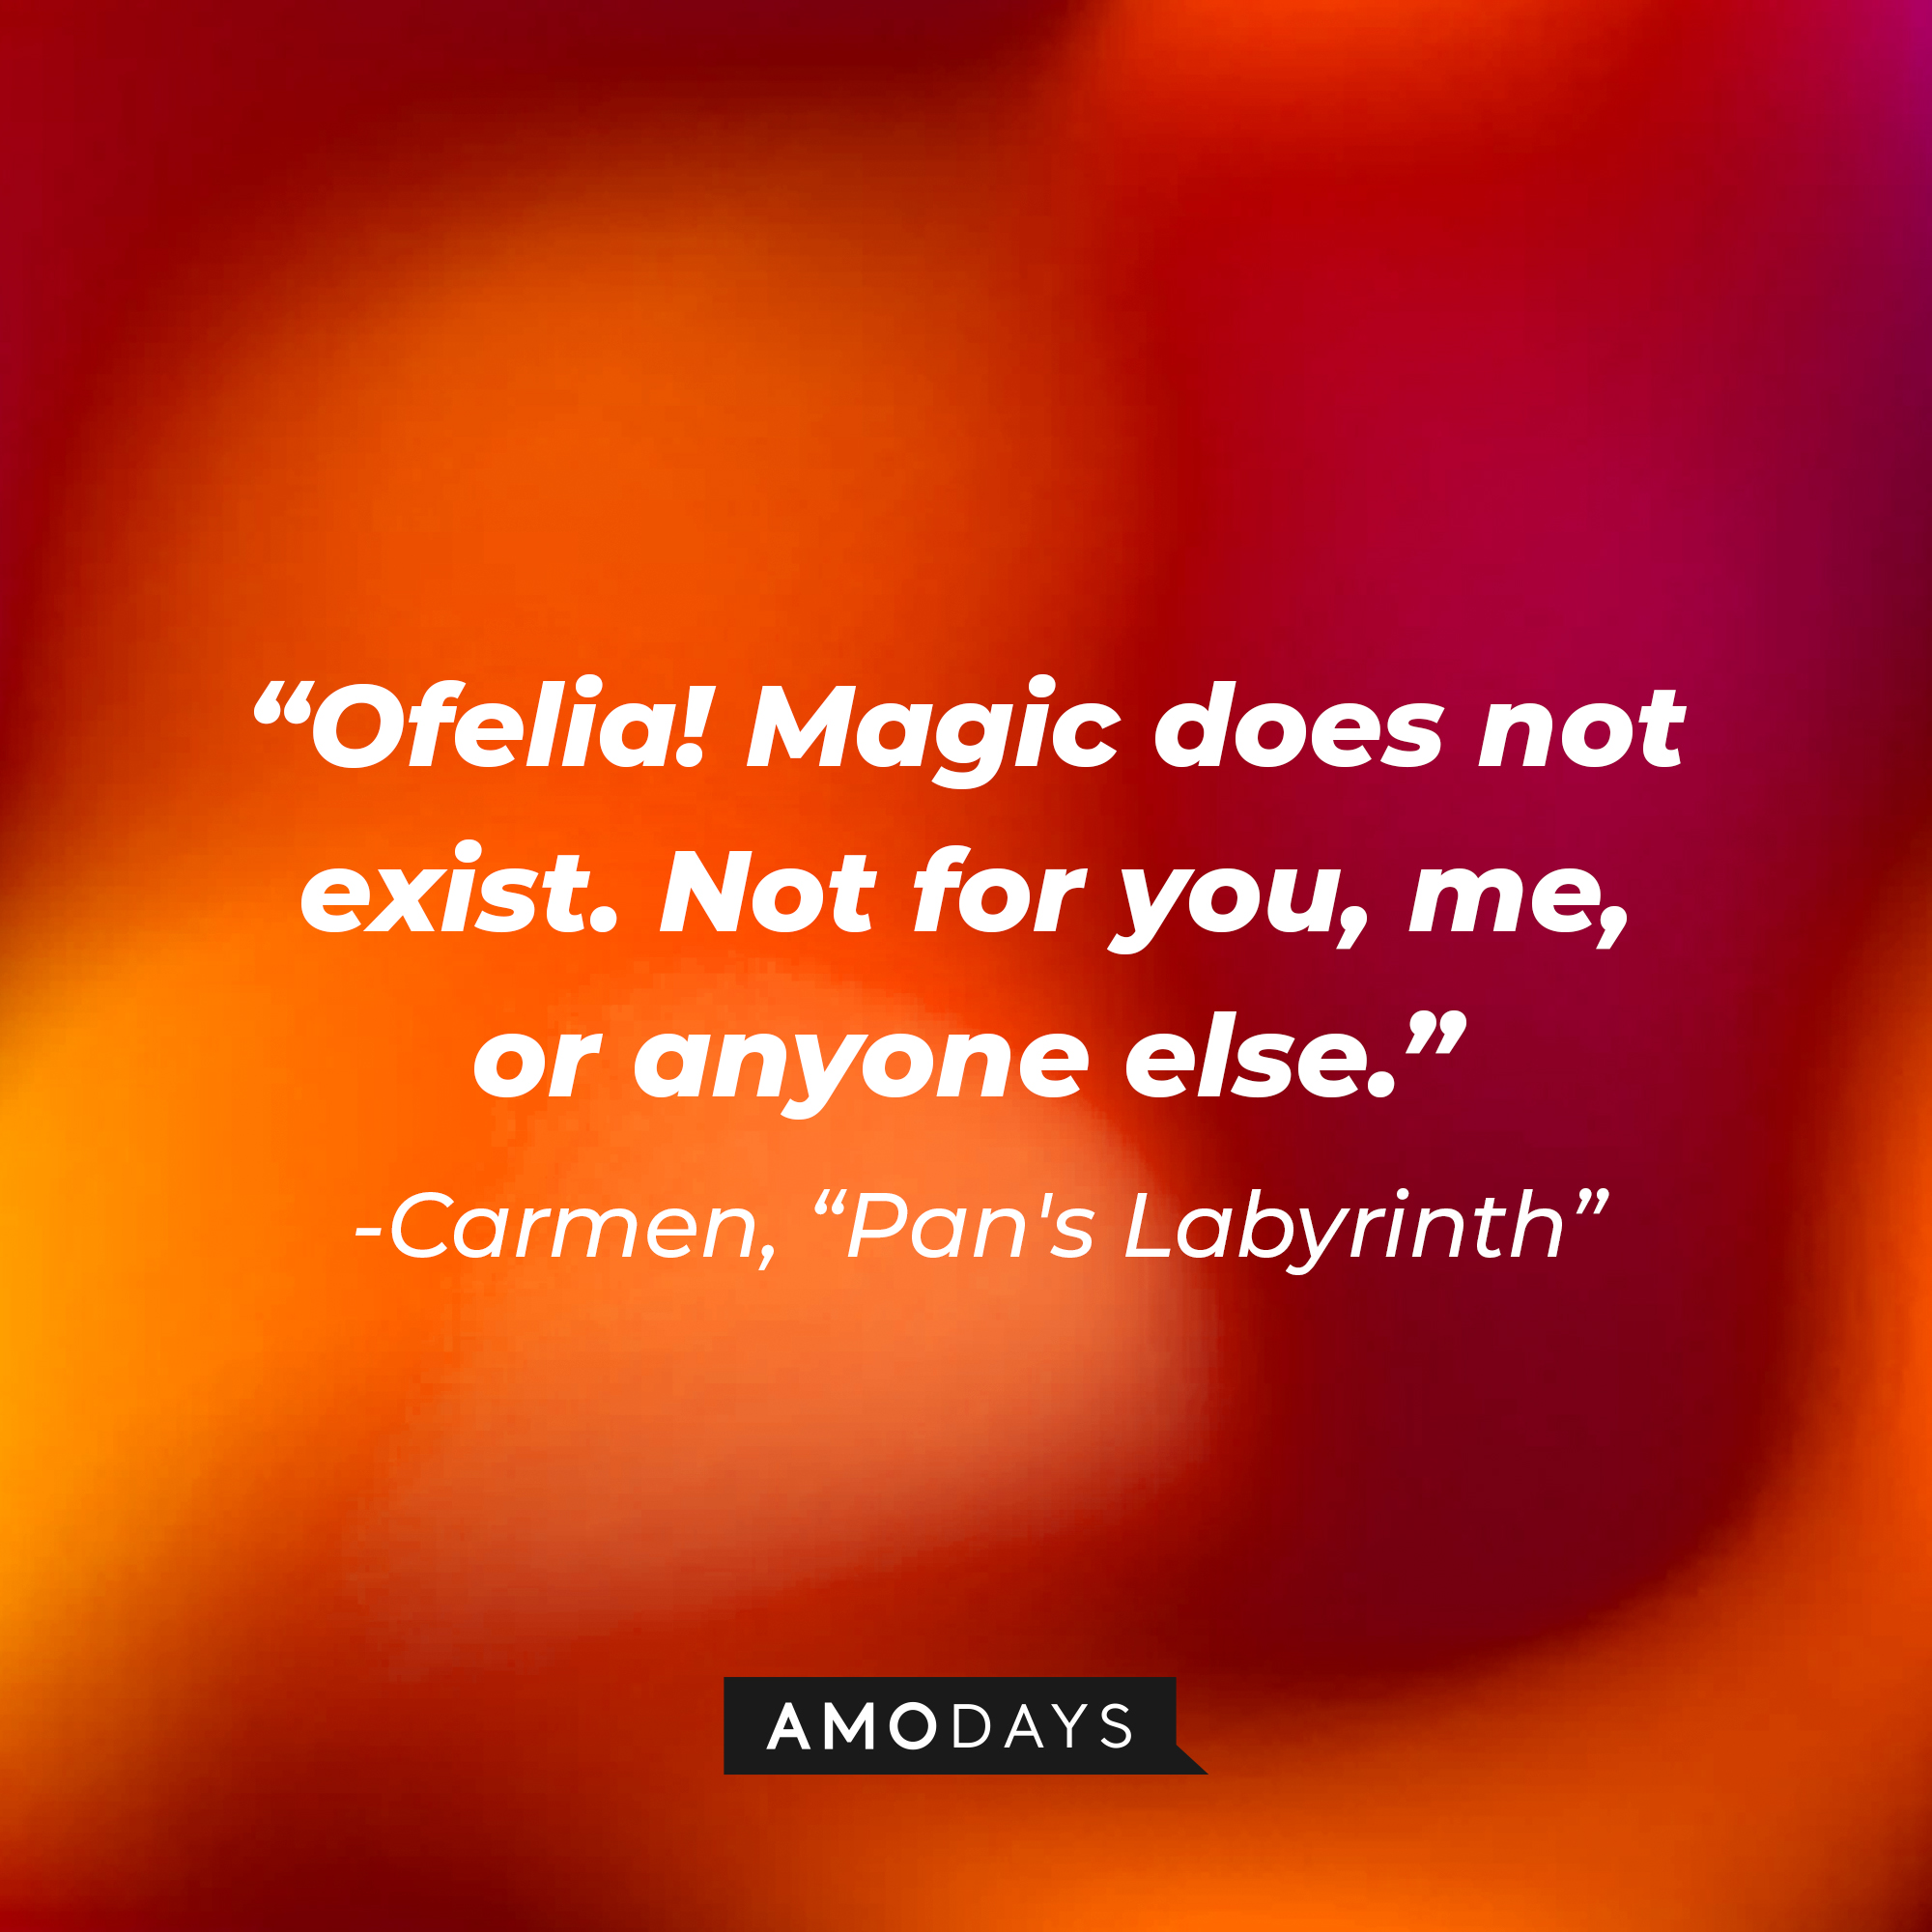 Carmen's quote: "Ofelia! Magic does not exist. Not for you, me, or anyone else." | Image: Amodays